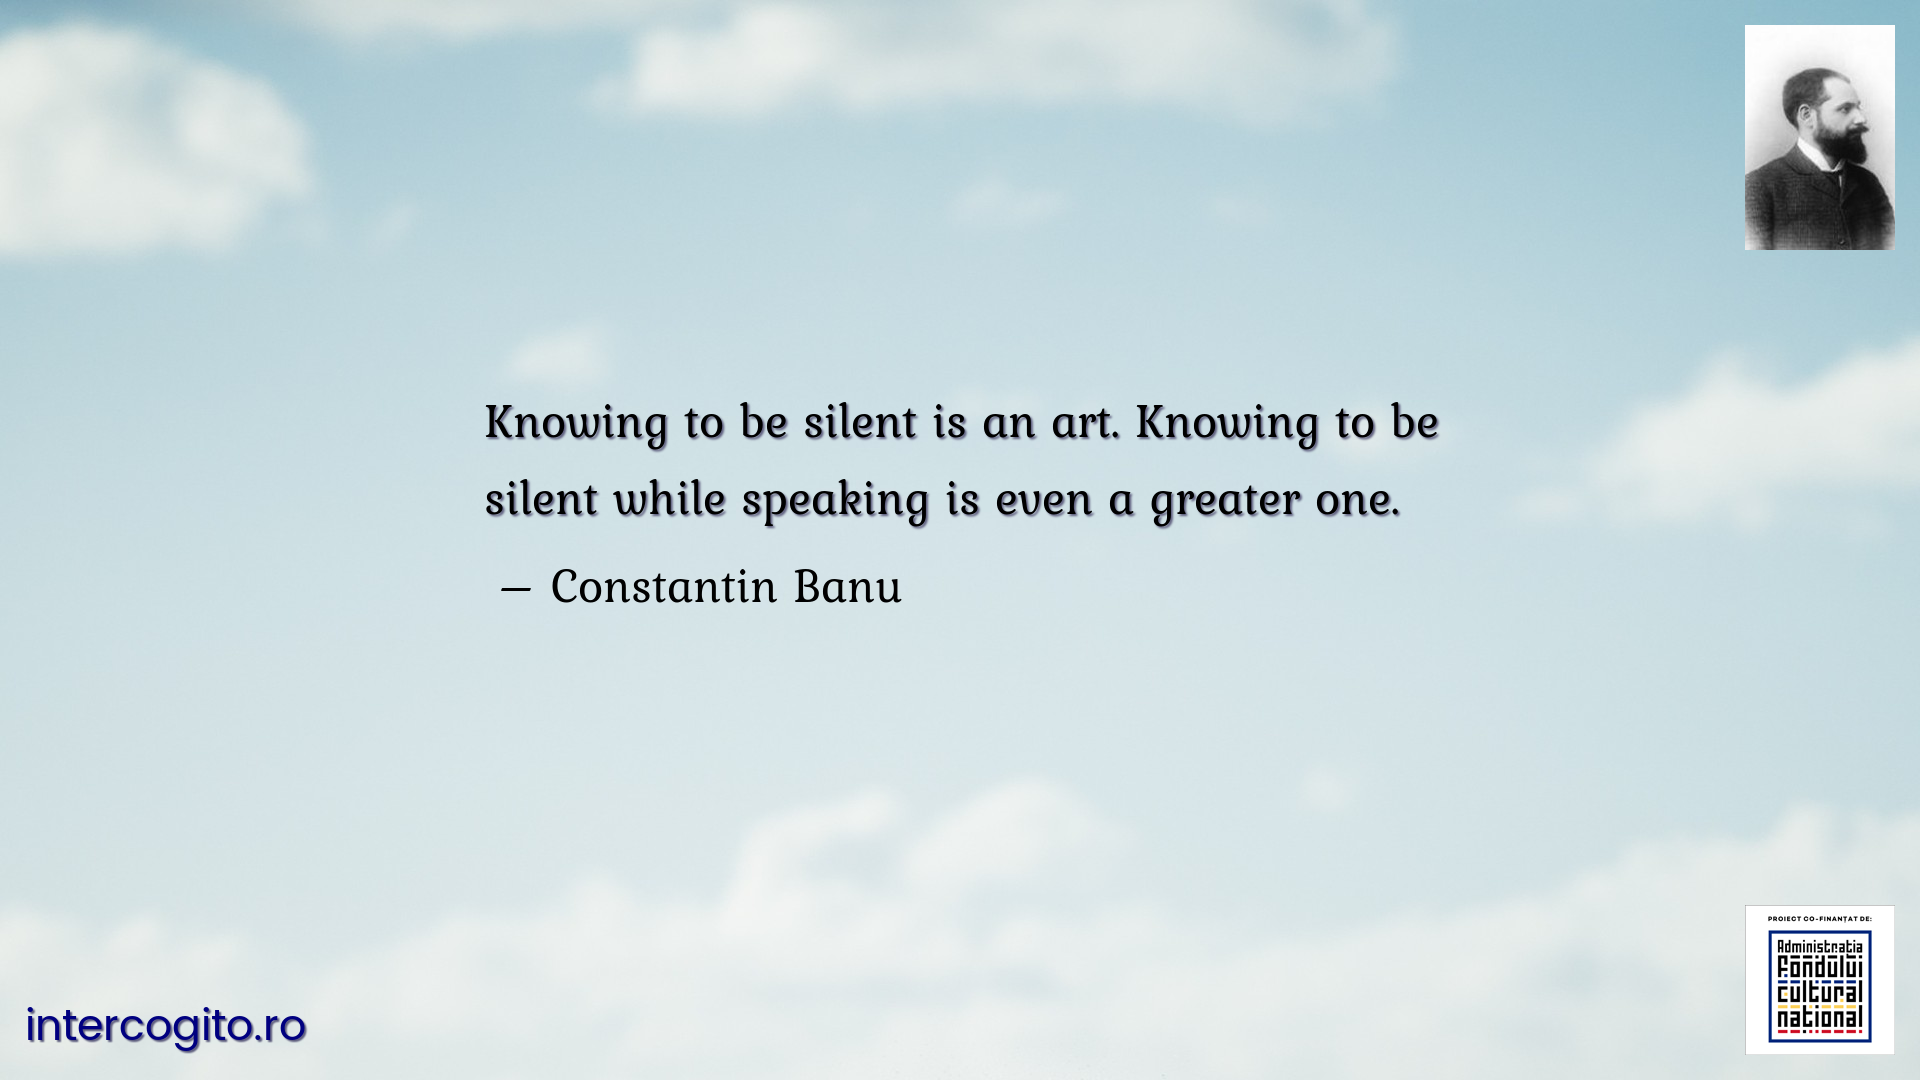 Knowing to be silent is an art. Knowing to be silent while speaking is even a greater one.